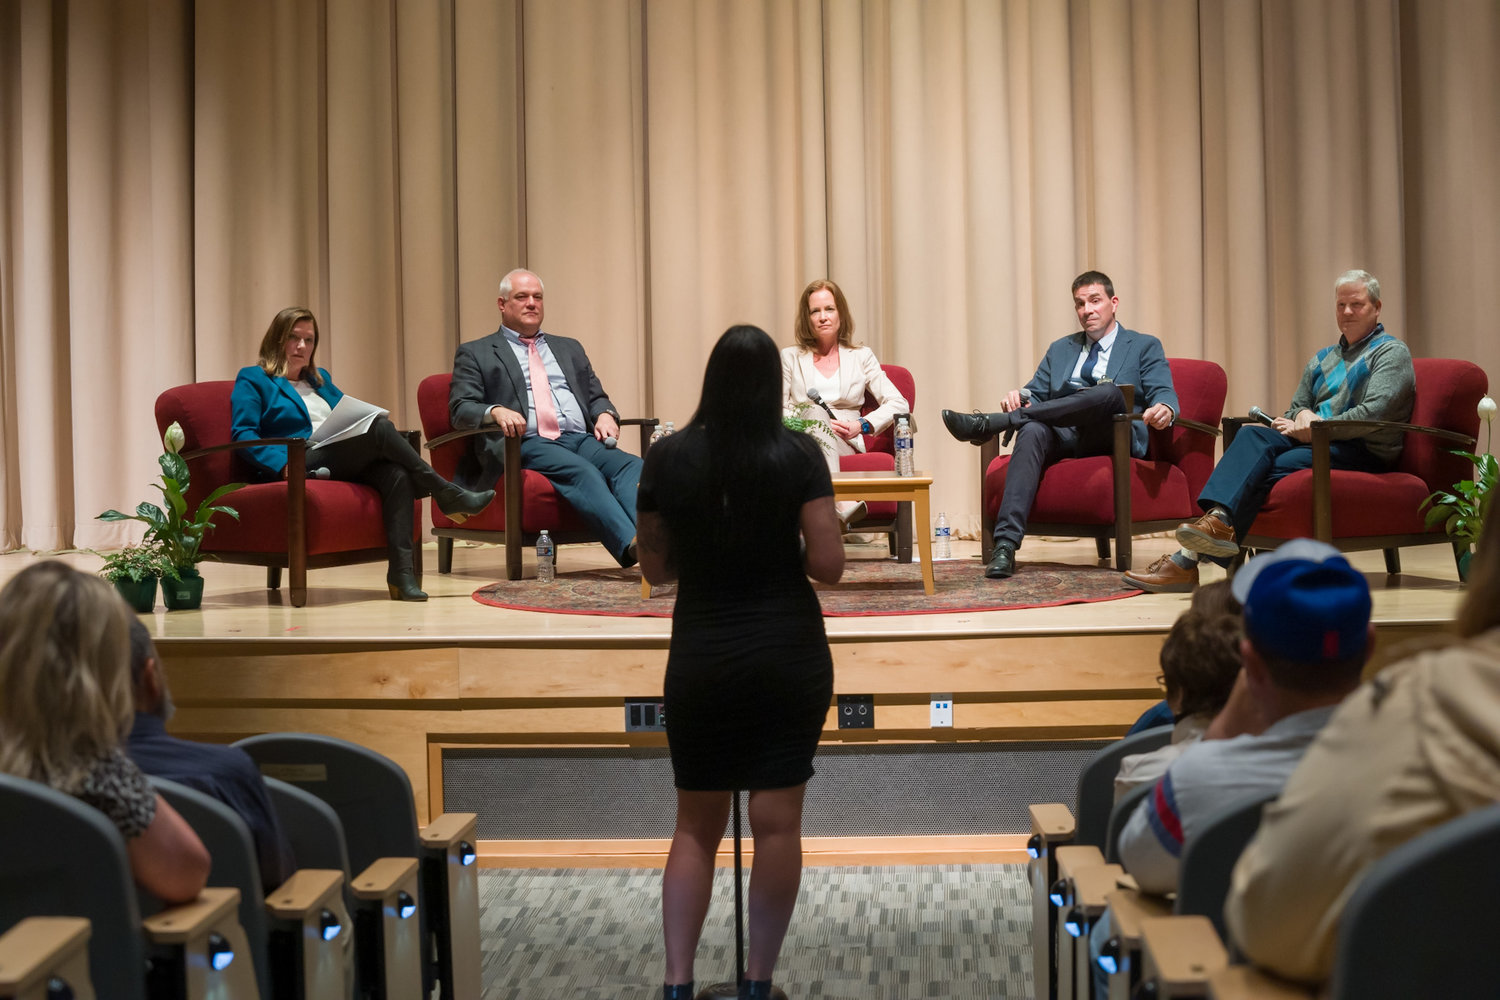 An audience member poses a question to Monday night’s panel on addiction, part of Delaware Valley University’s series of programs on violence in America.